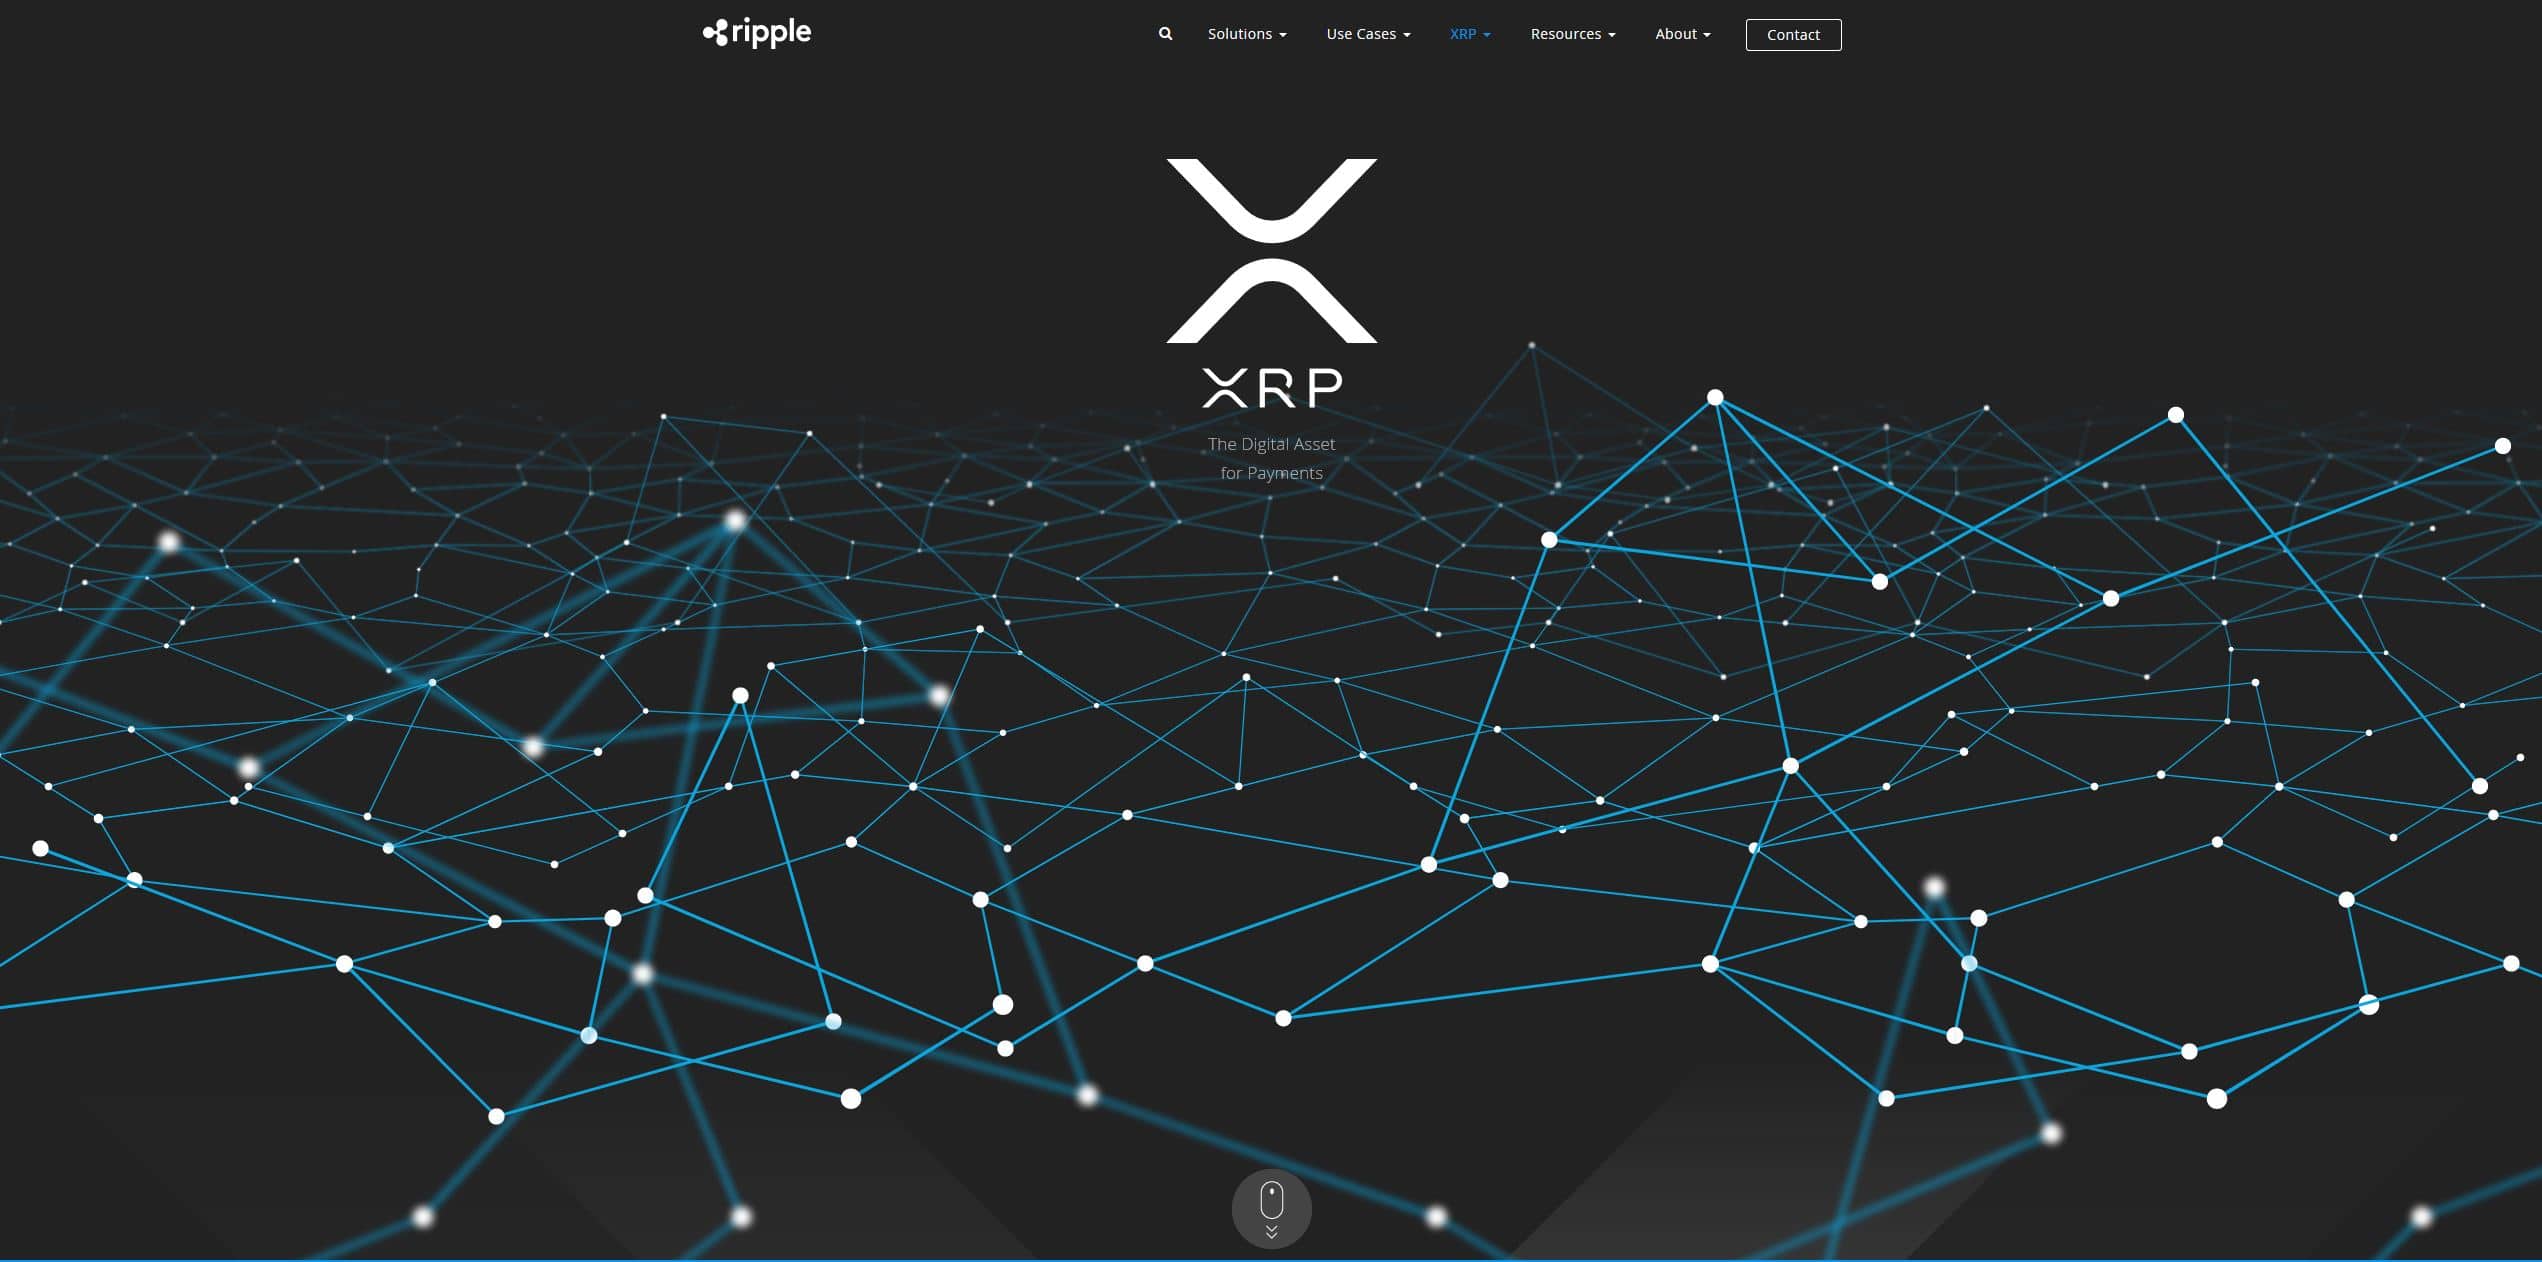 Tron vs. XRP, and Both Controversial Tokens Against the World